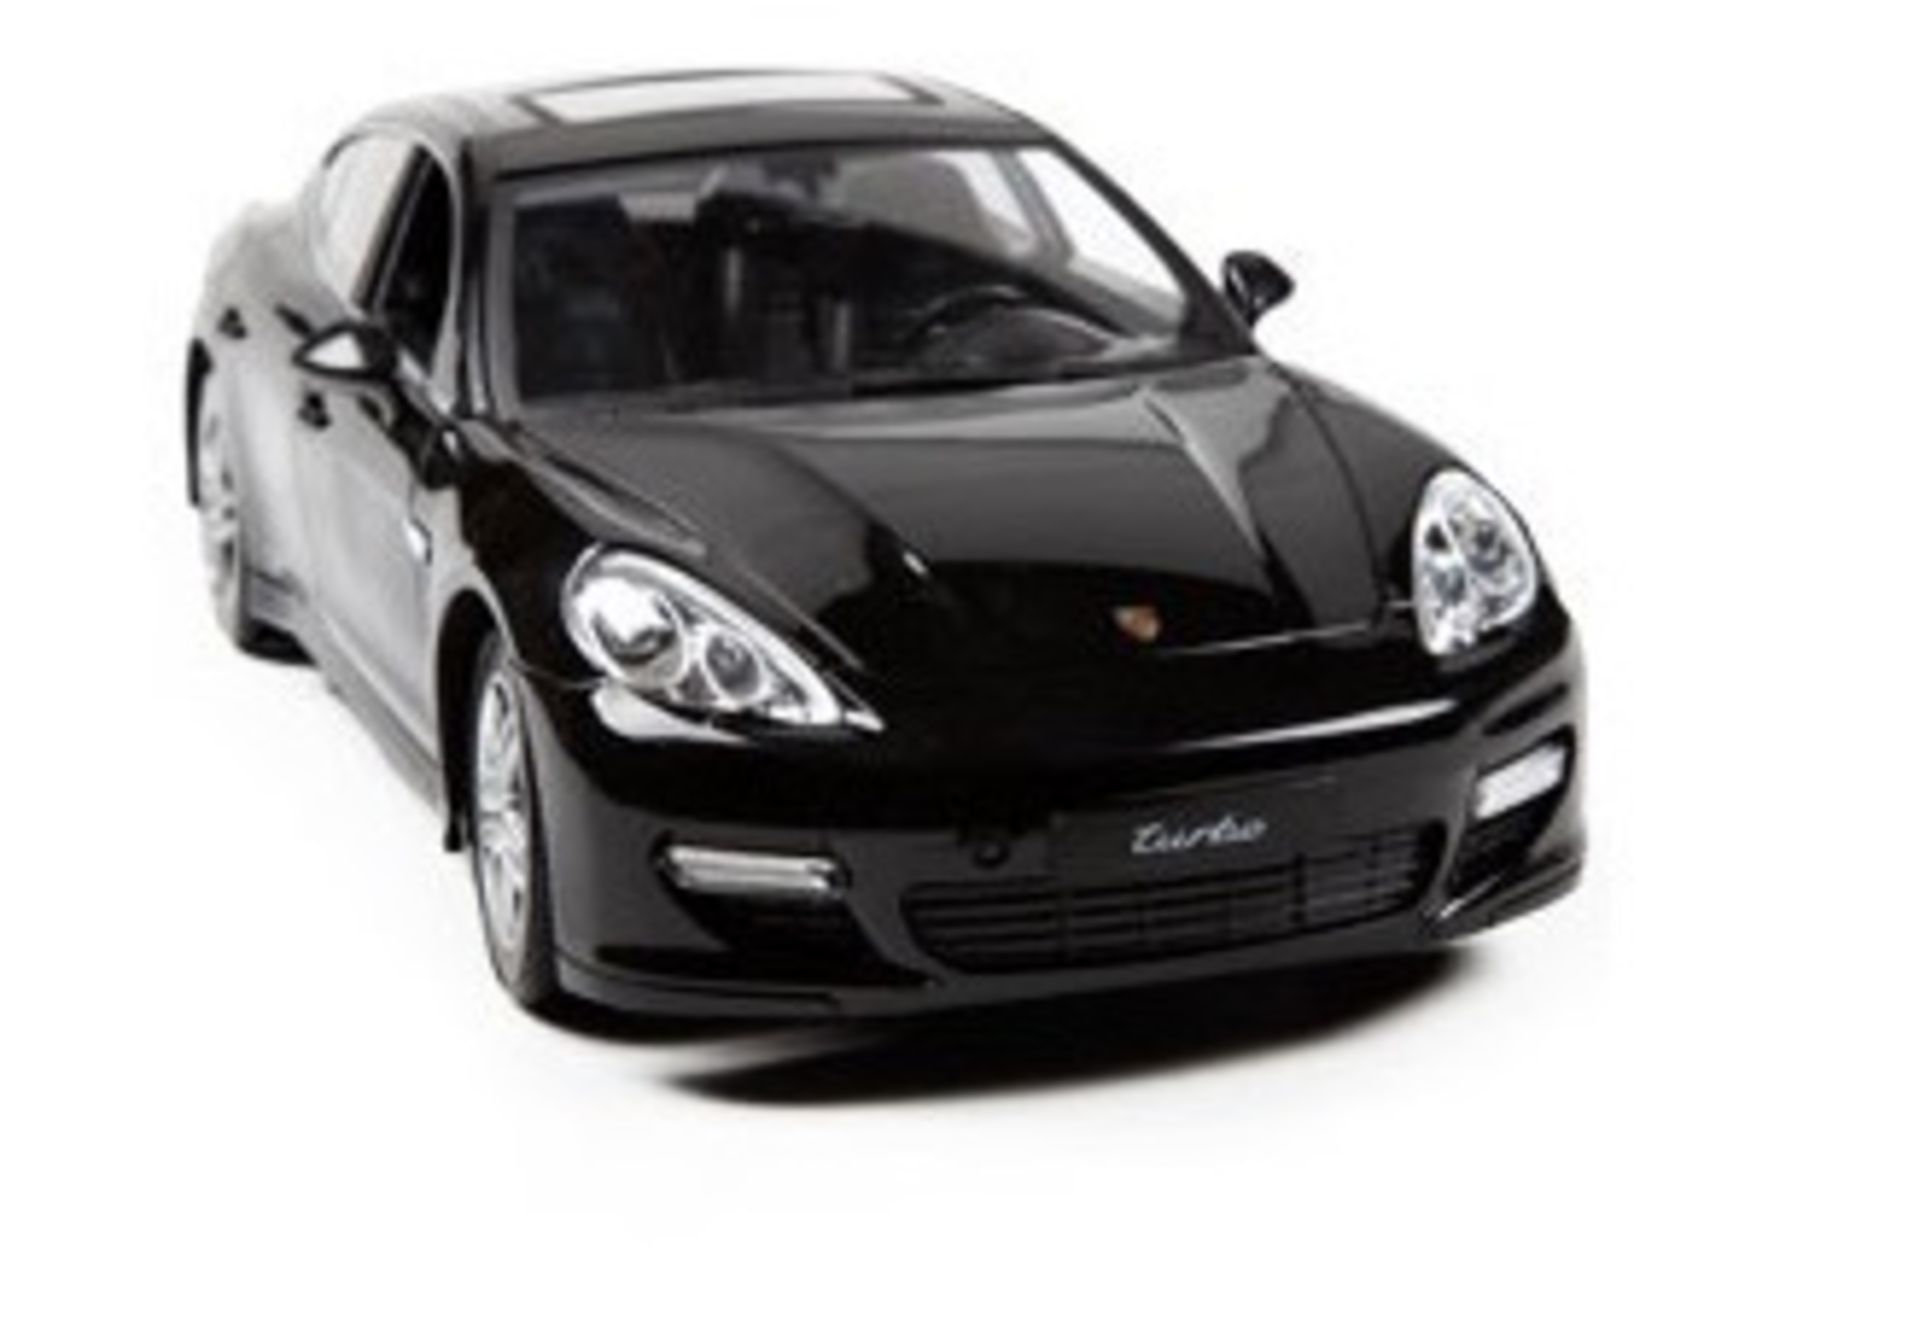 V Brand New 1:14 Porsche Panamera S Hybrid Radio Controlled Car With Forward-Reverse-Left & Right-